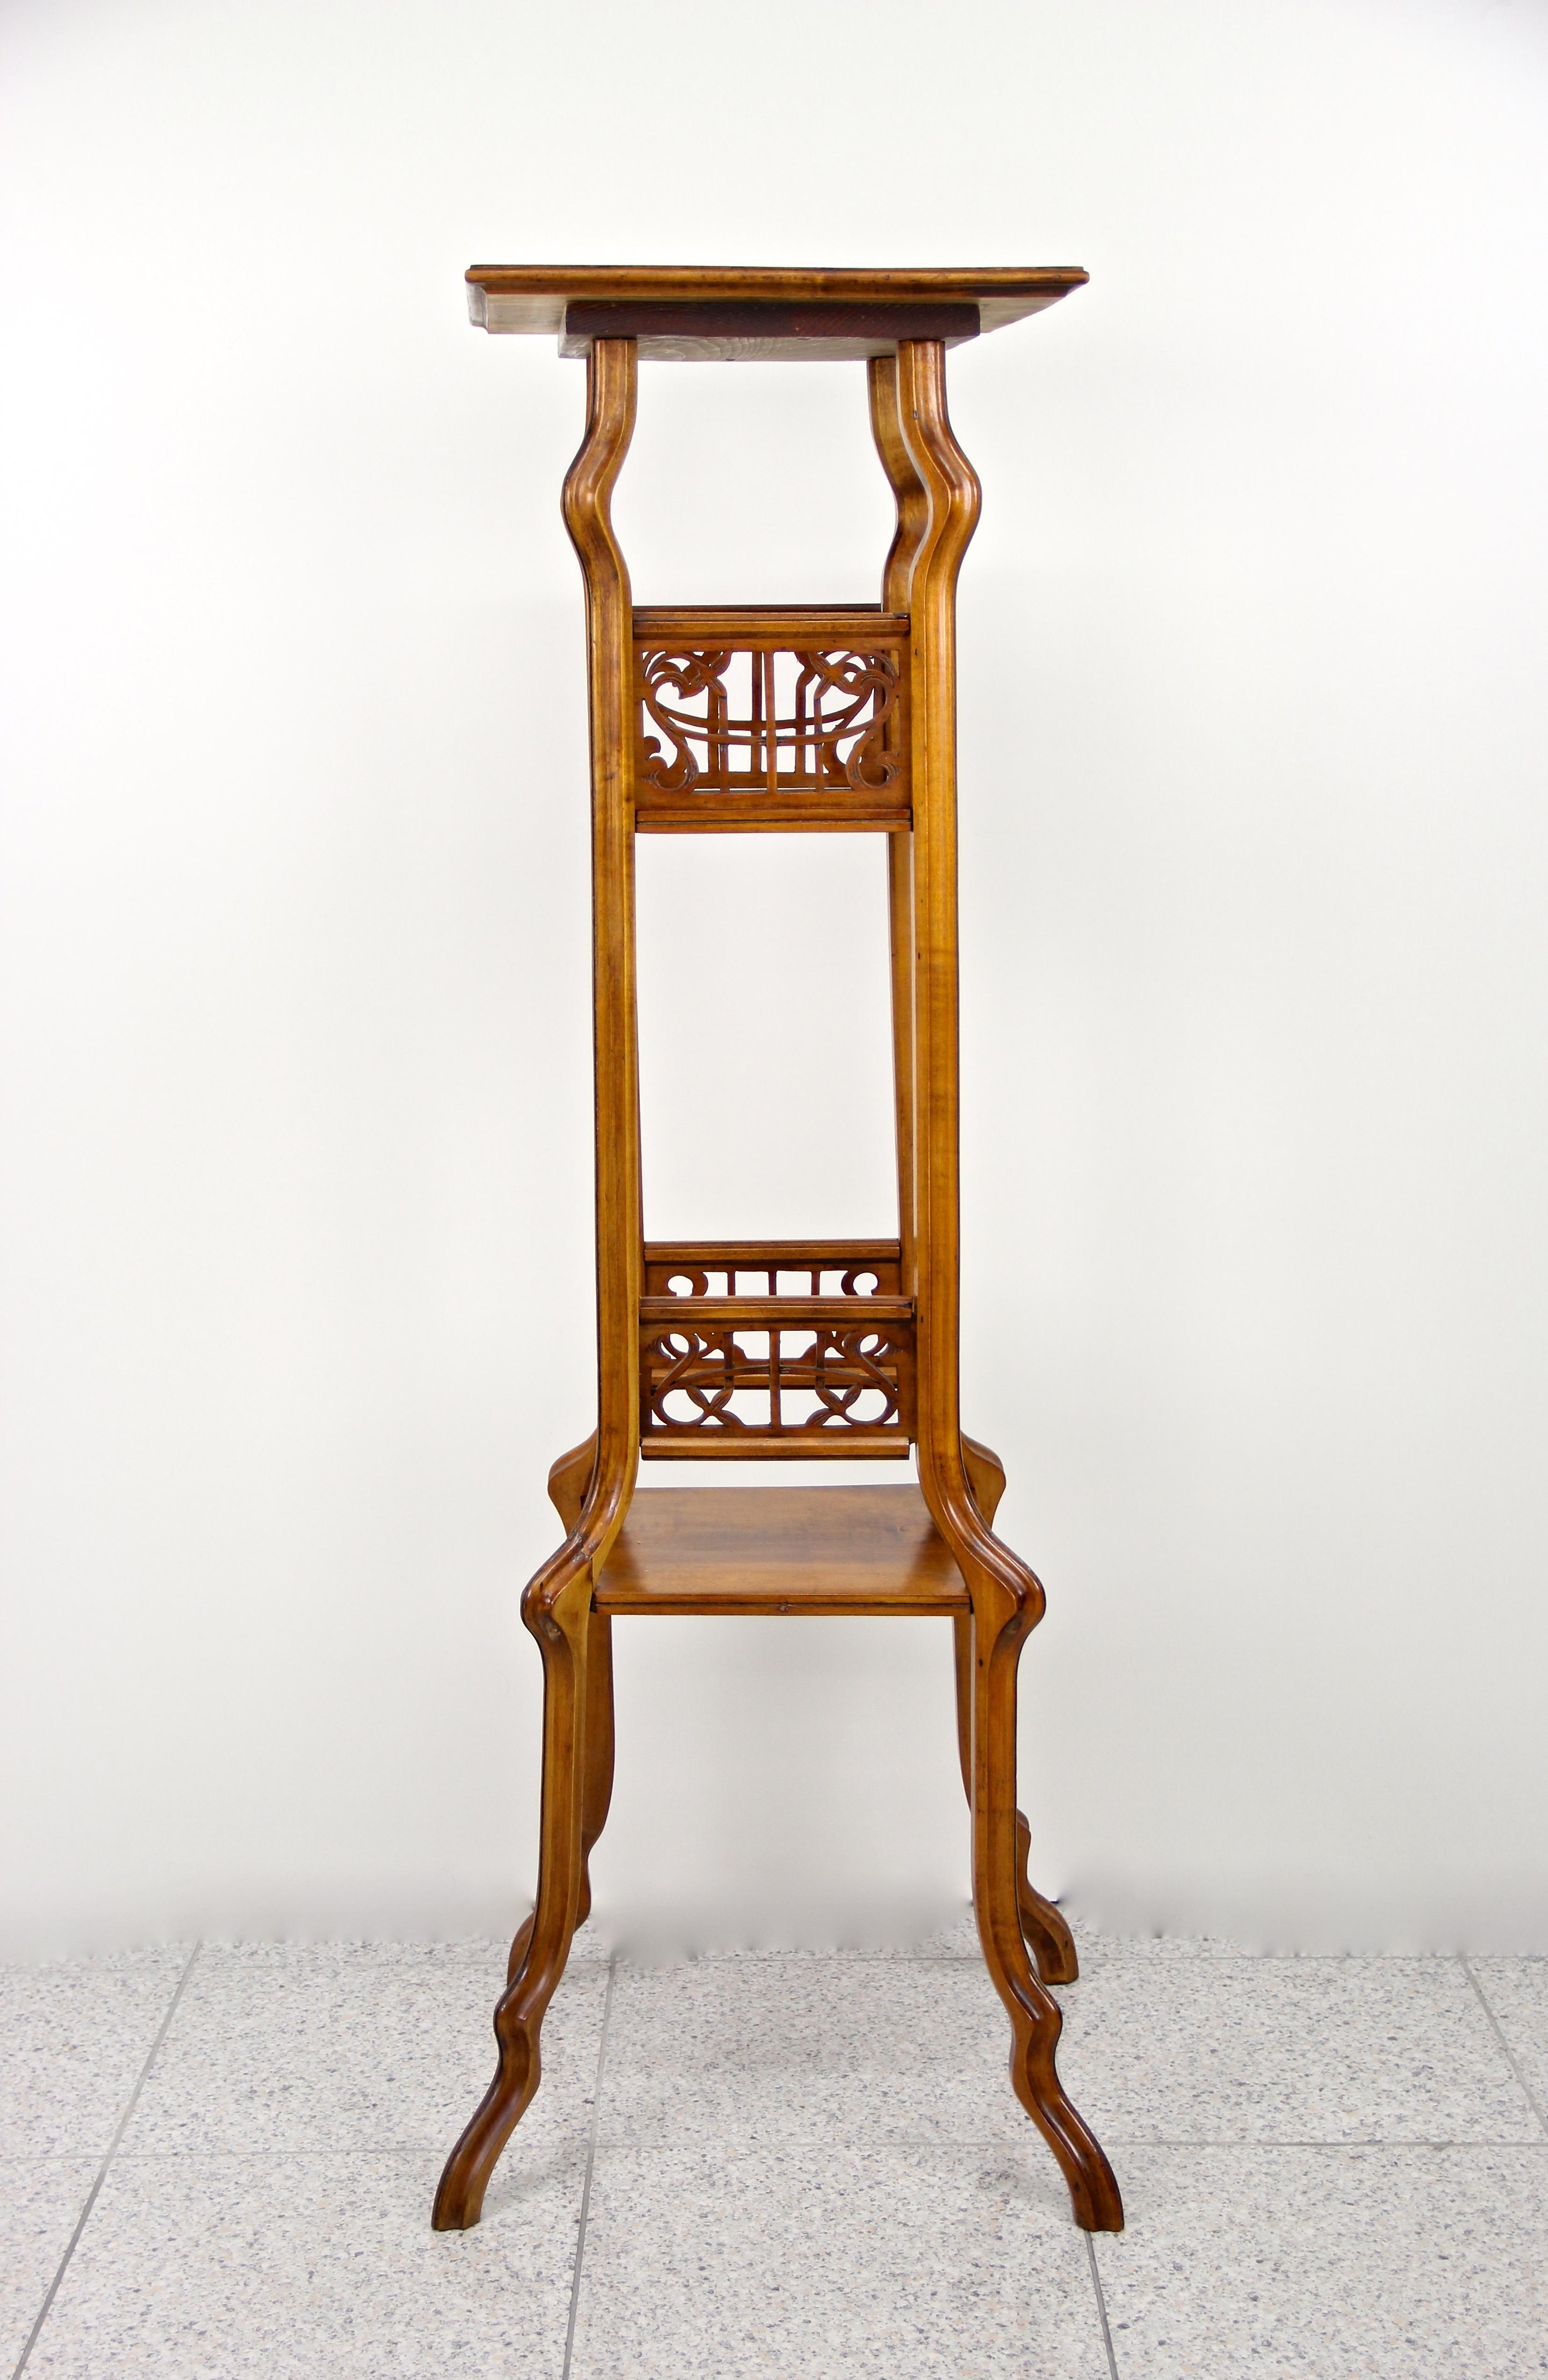 Exceptional Art Nouveau Pedestal from the early period in Austria circa 1900. This absolute unique light walnut column/ pedestal shows an impressive, artfully processed design with extraordinary lines. Representing the 